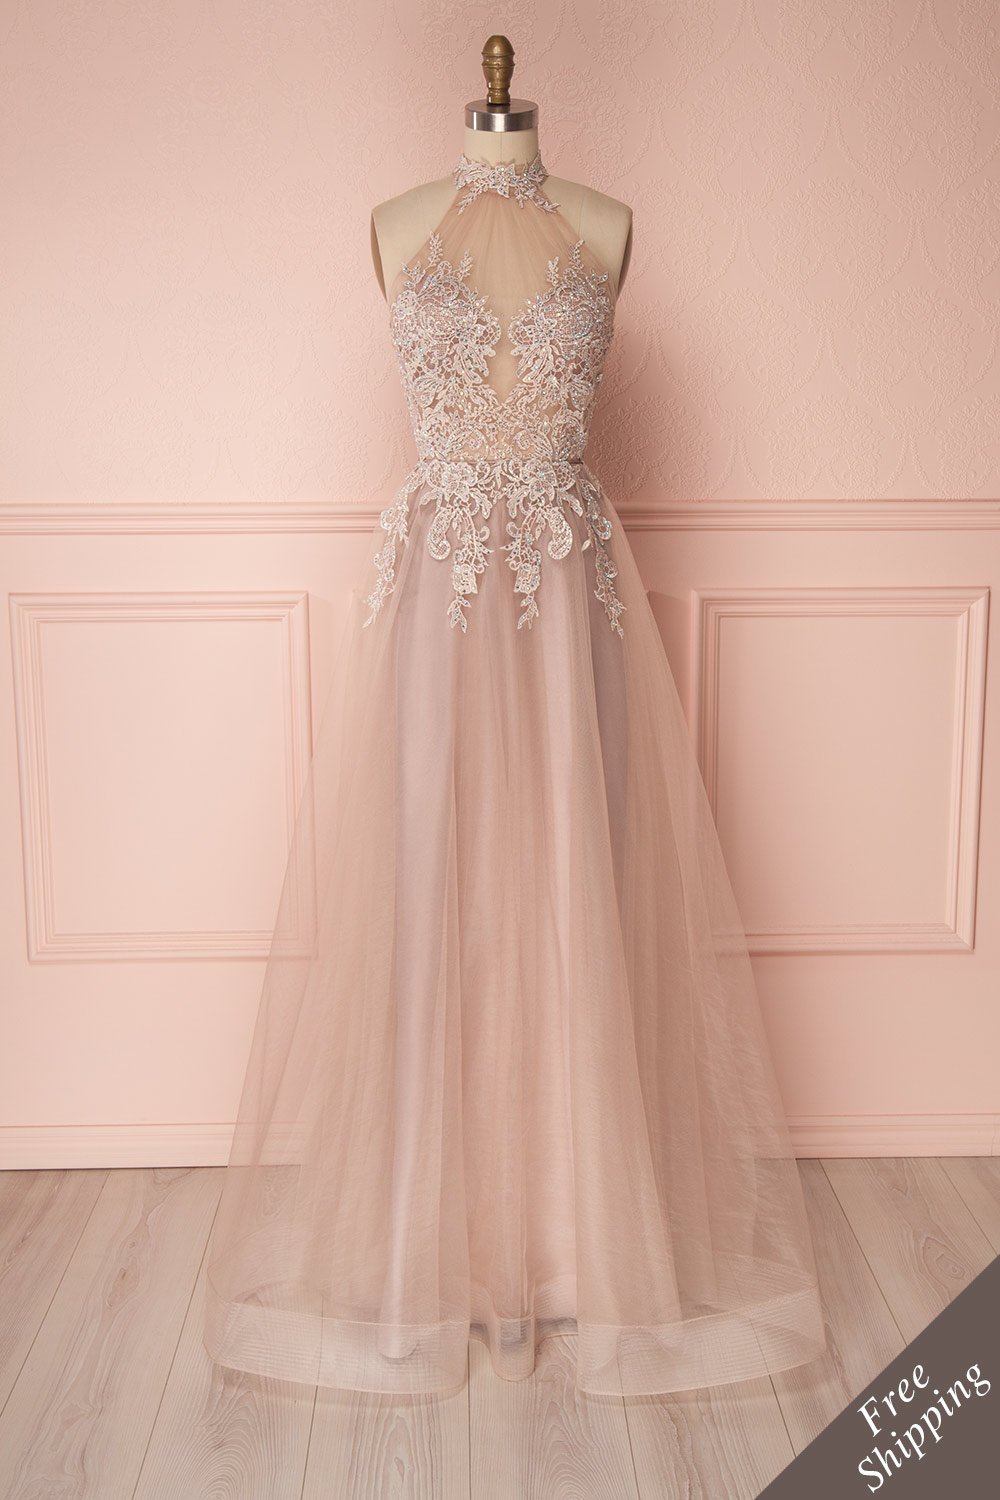 Almedia Dusty Mauve Embroidered & Crystals Halter Gown | Boutique 1861